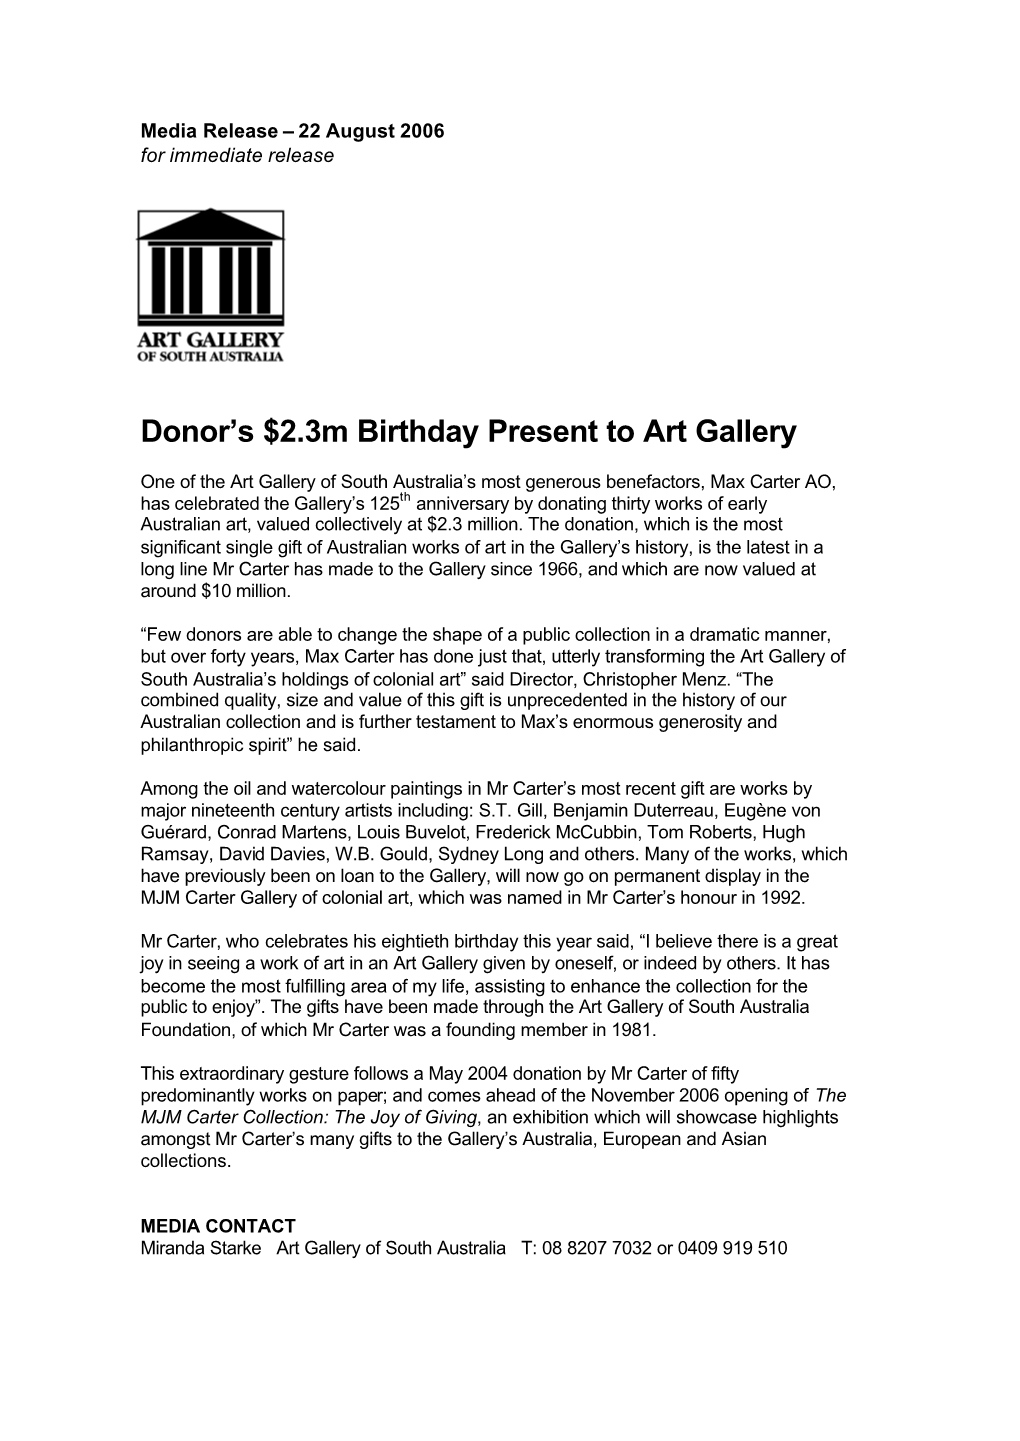 Donor's $2.3M Birthday Present to Art Gallery